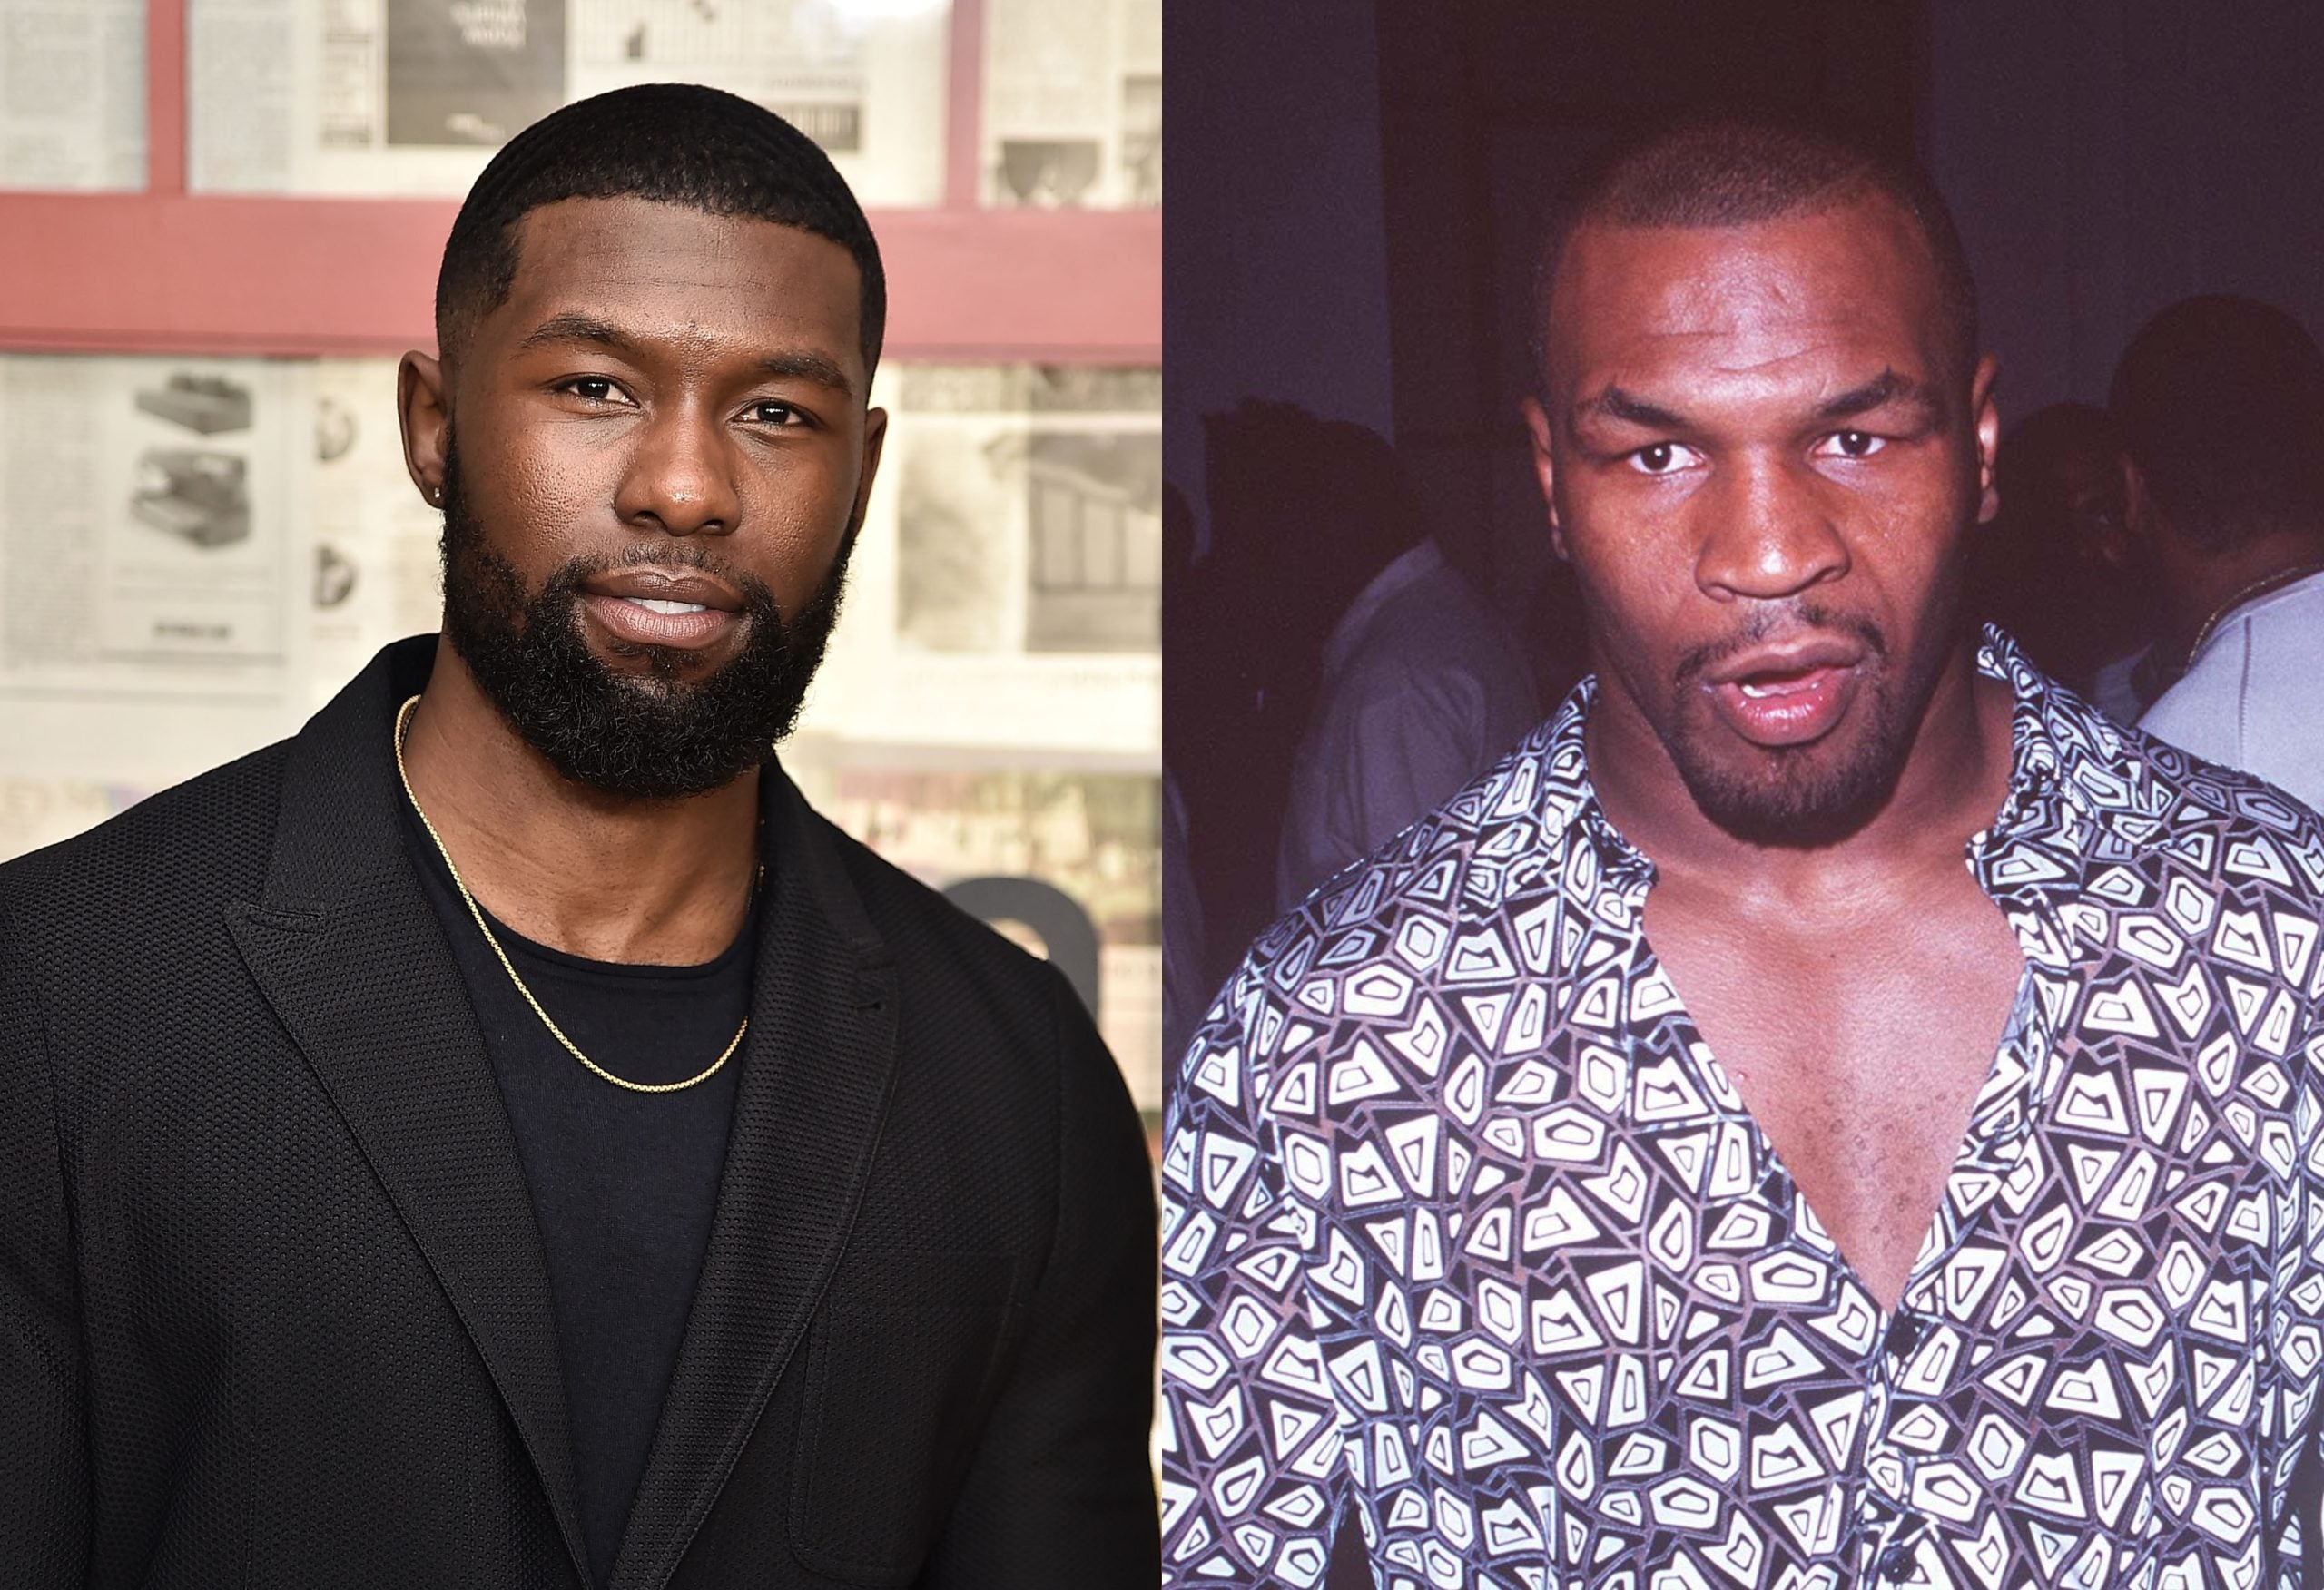 WATCH: Hulu Gives First Look Of Trevante Rhodes As Mike Tyson in Upcoming Miniseries, 'Mike'